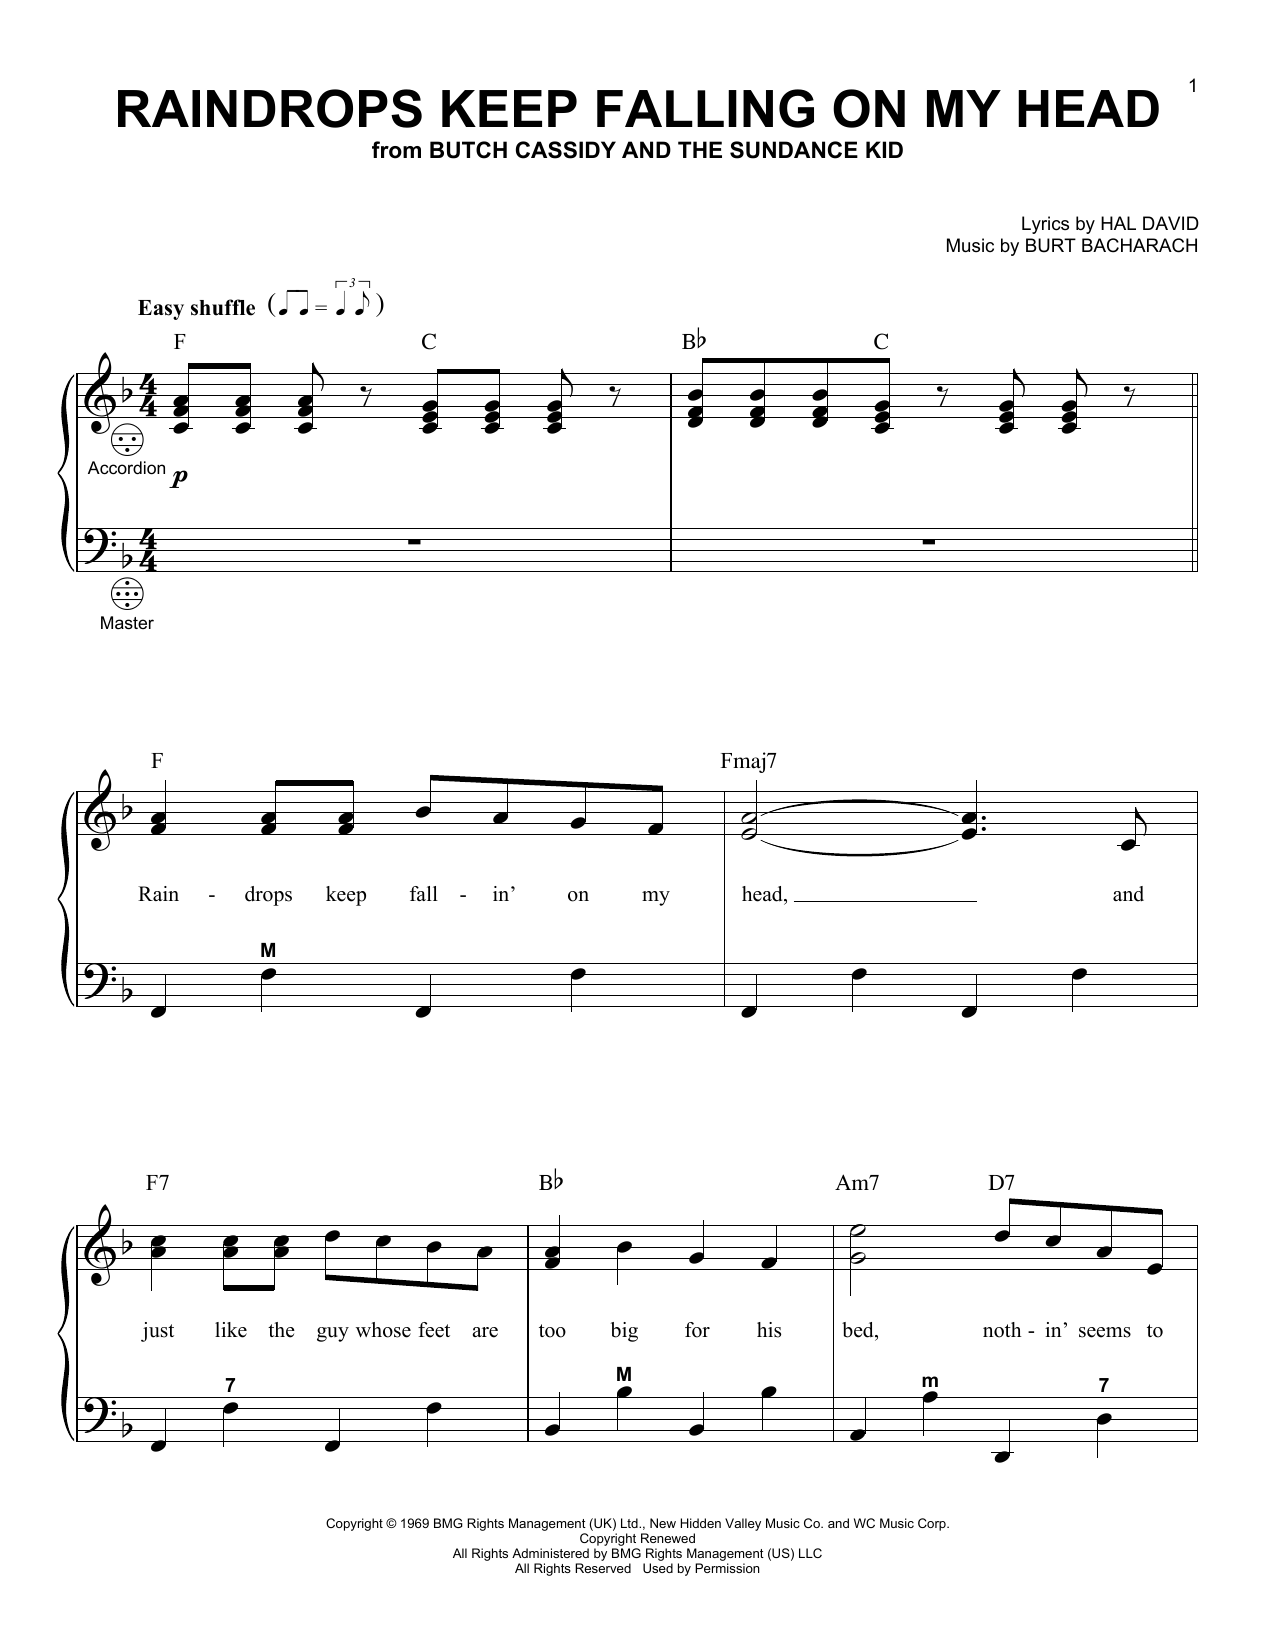 B.J. Thomas Raindrops Keep Fallin' On My Head sheet music preview music notes and score for Piano including 2 page(s)